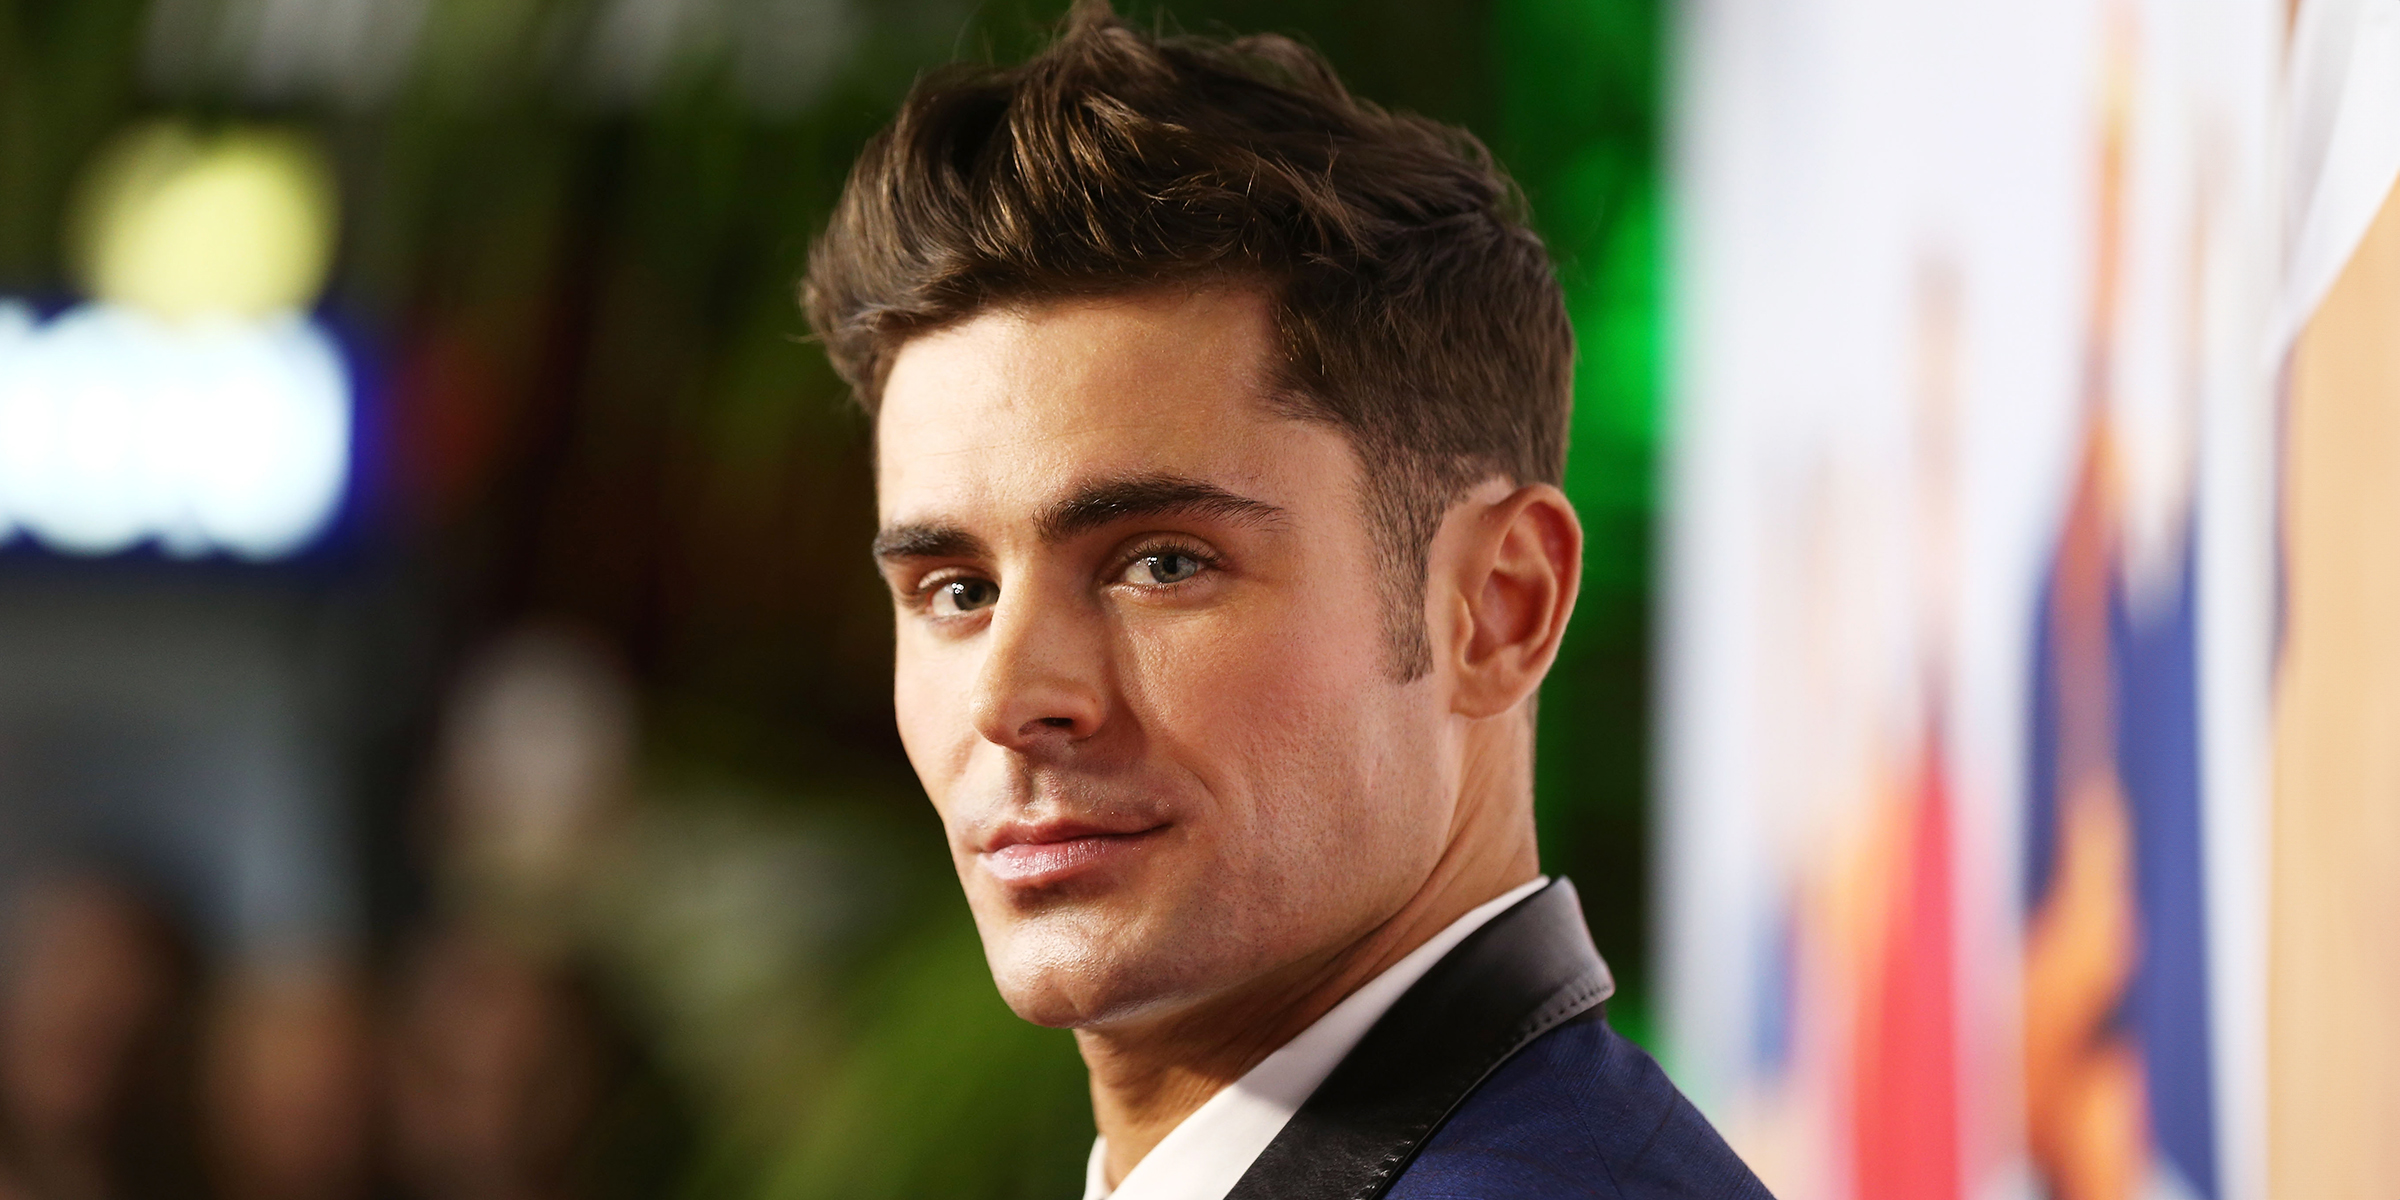 Zac Efron | Source: Getty Images